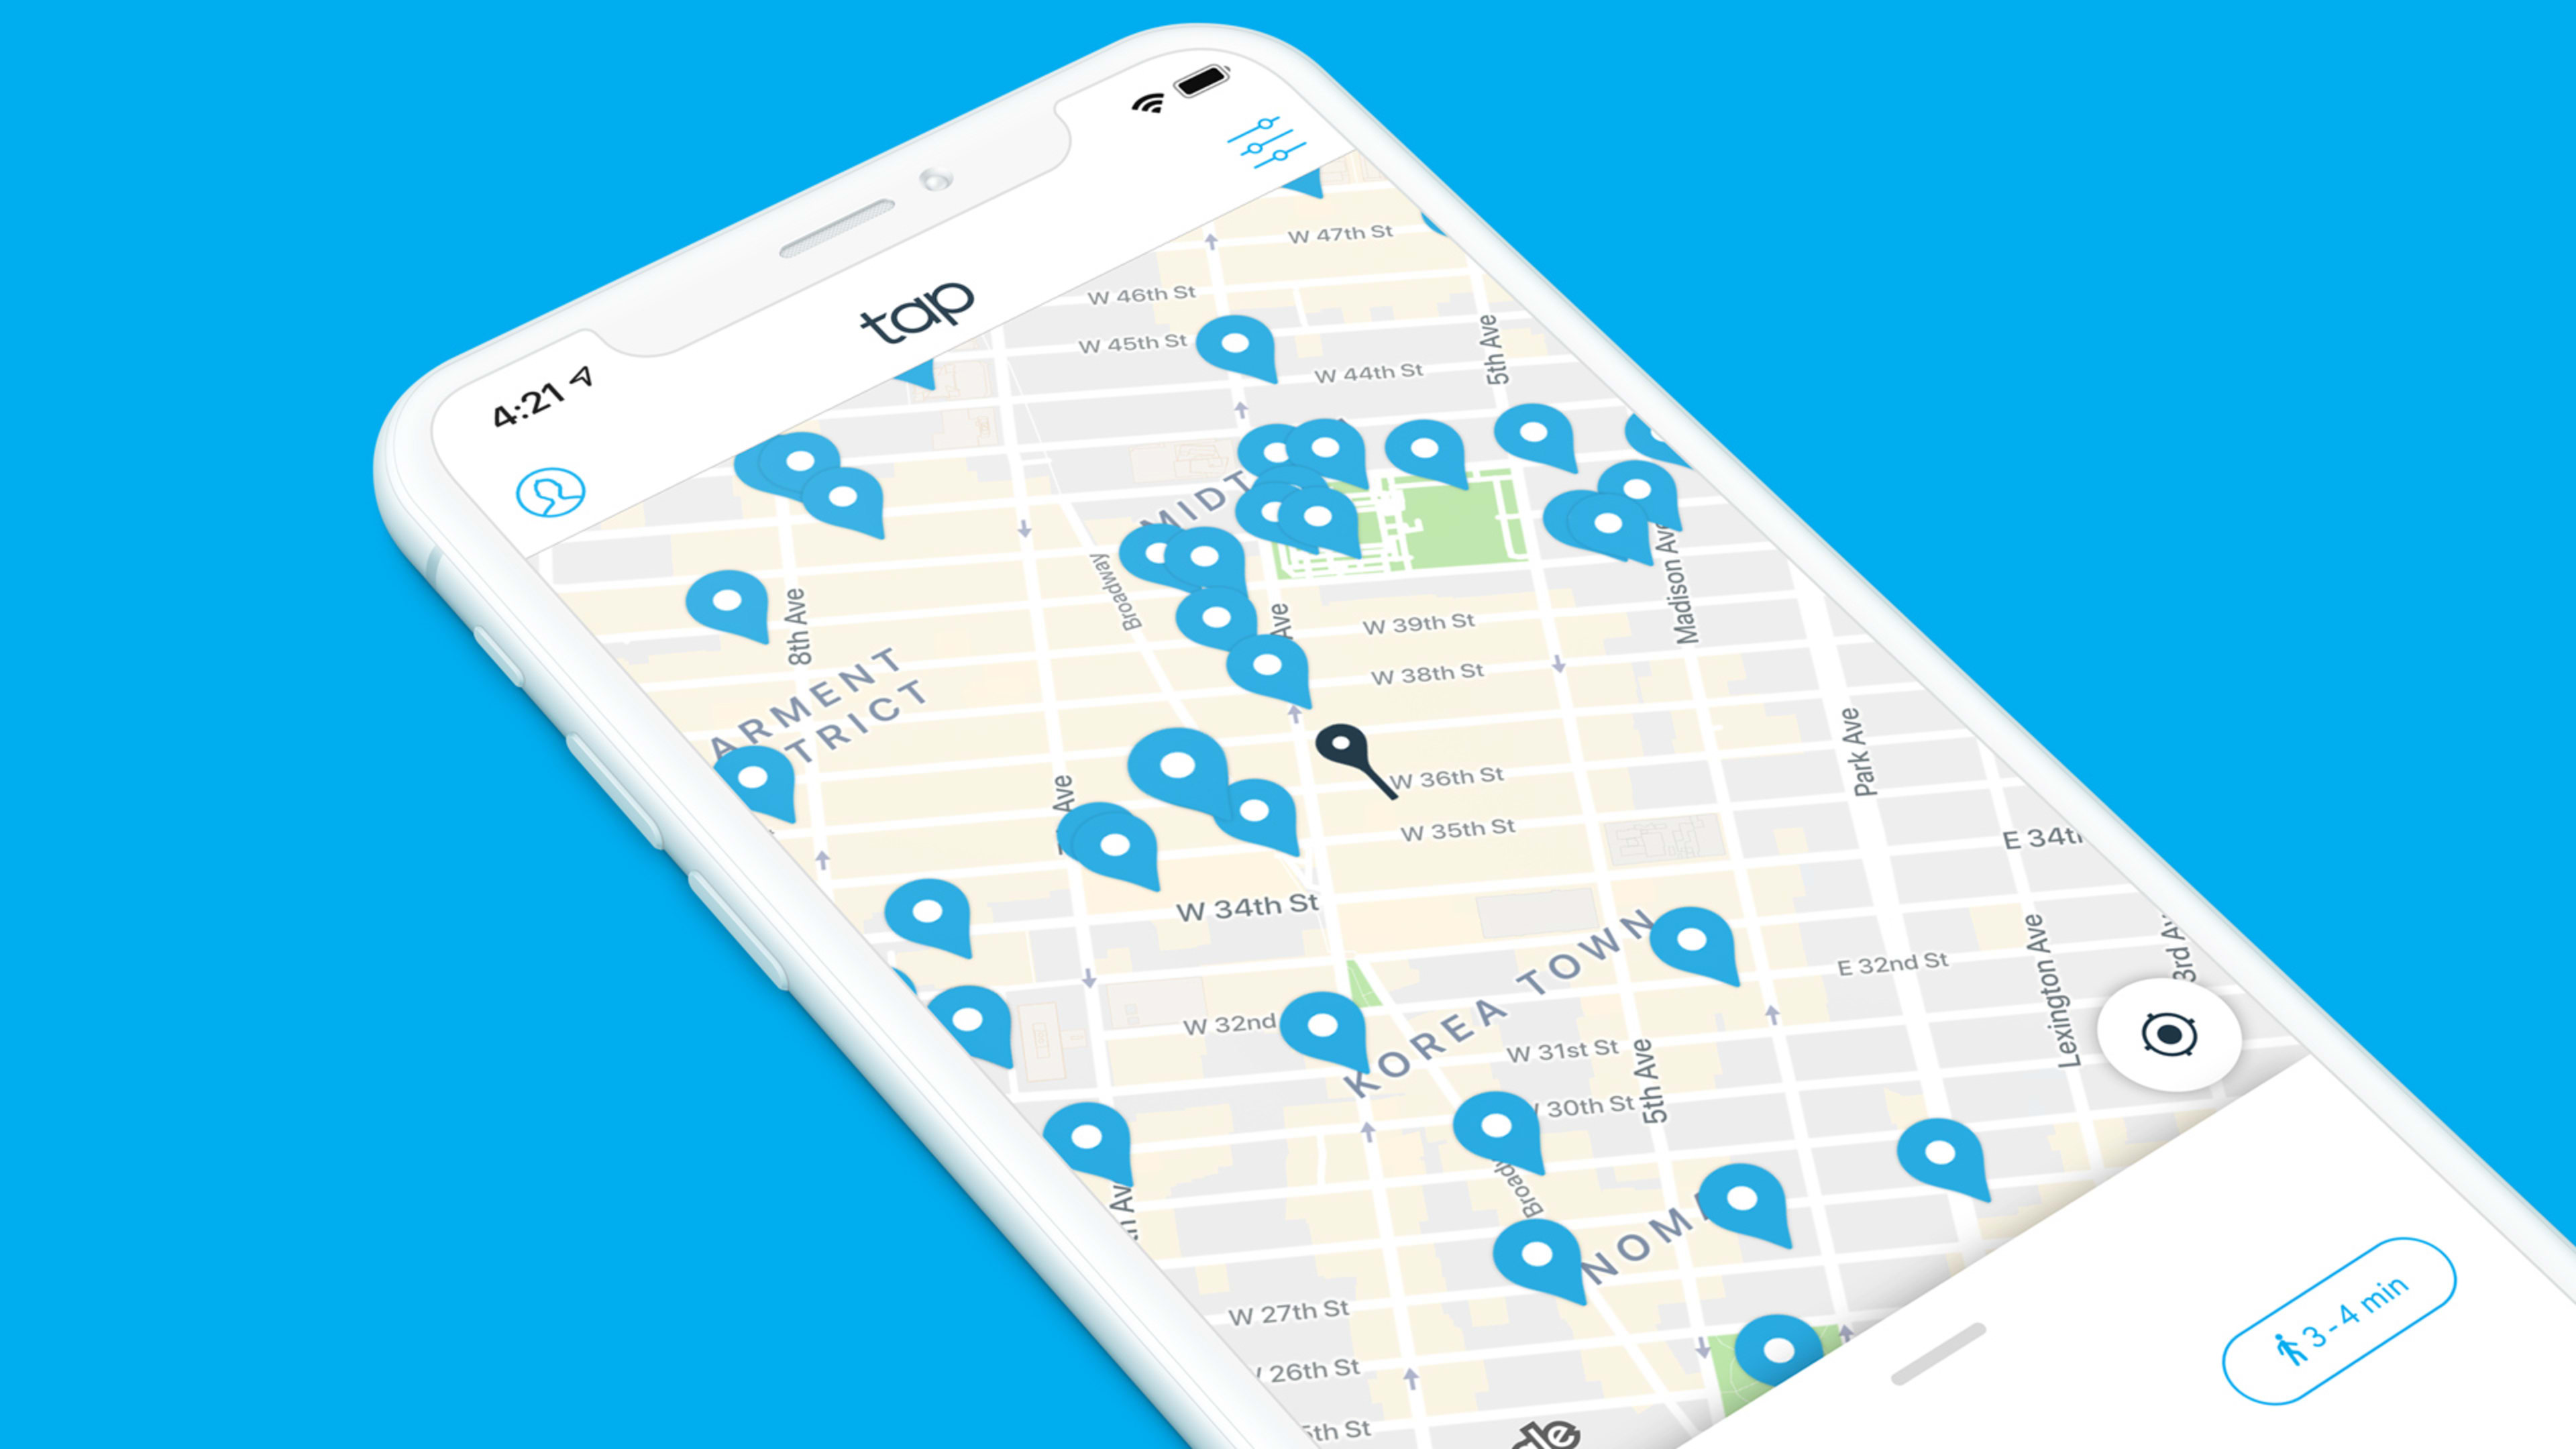 Don’t buy bottled water: This app tells you the closest place you can fill up for free